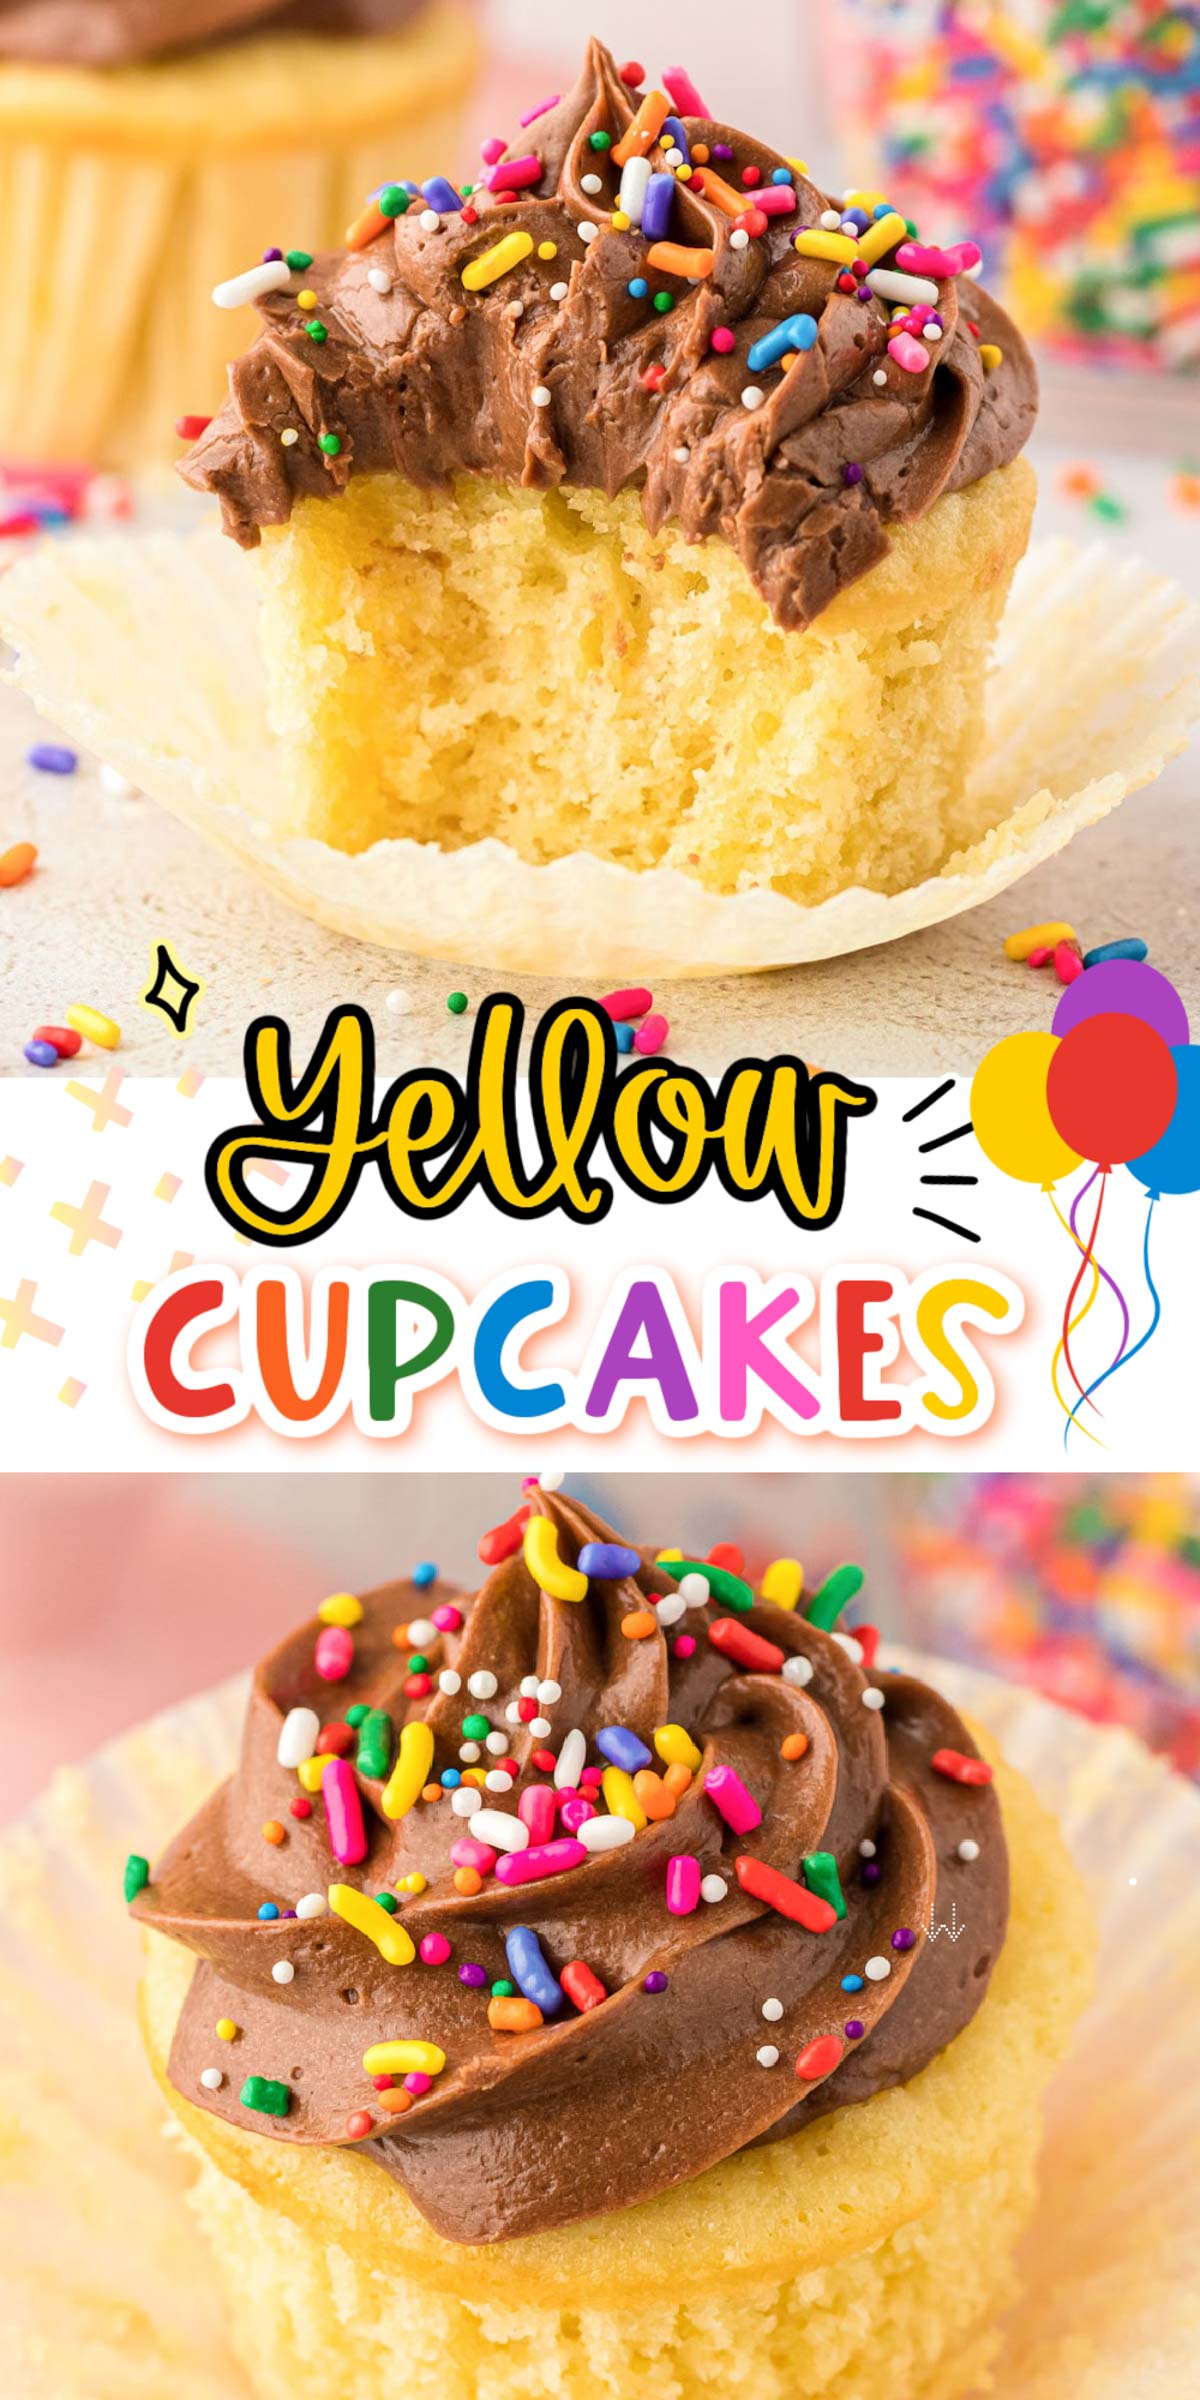 This Moist Yellow Cupcake Recipe creates over two dozen bakery-level treats in your own kitchen that everyone will devour in record time! via @sugarandsoulco